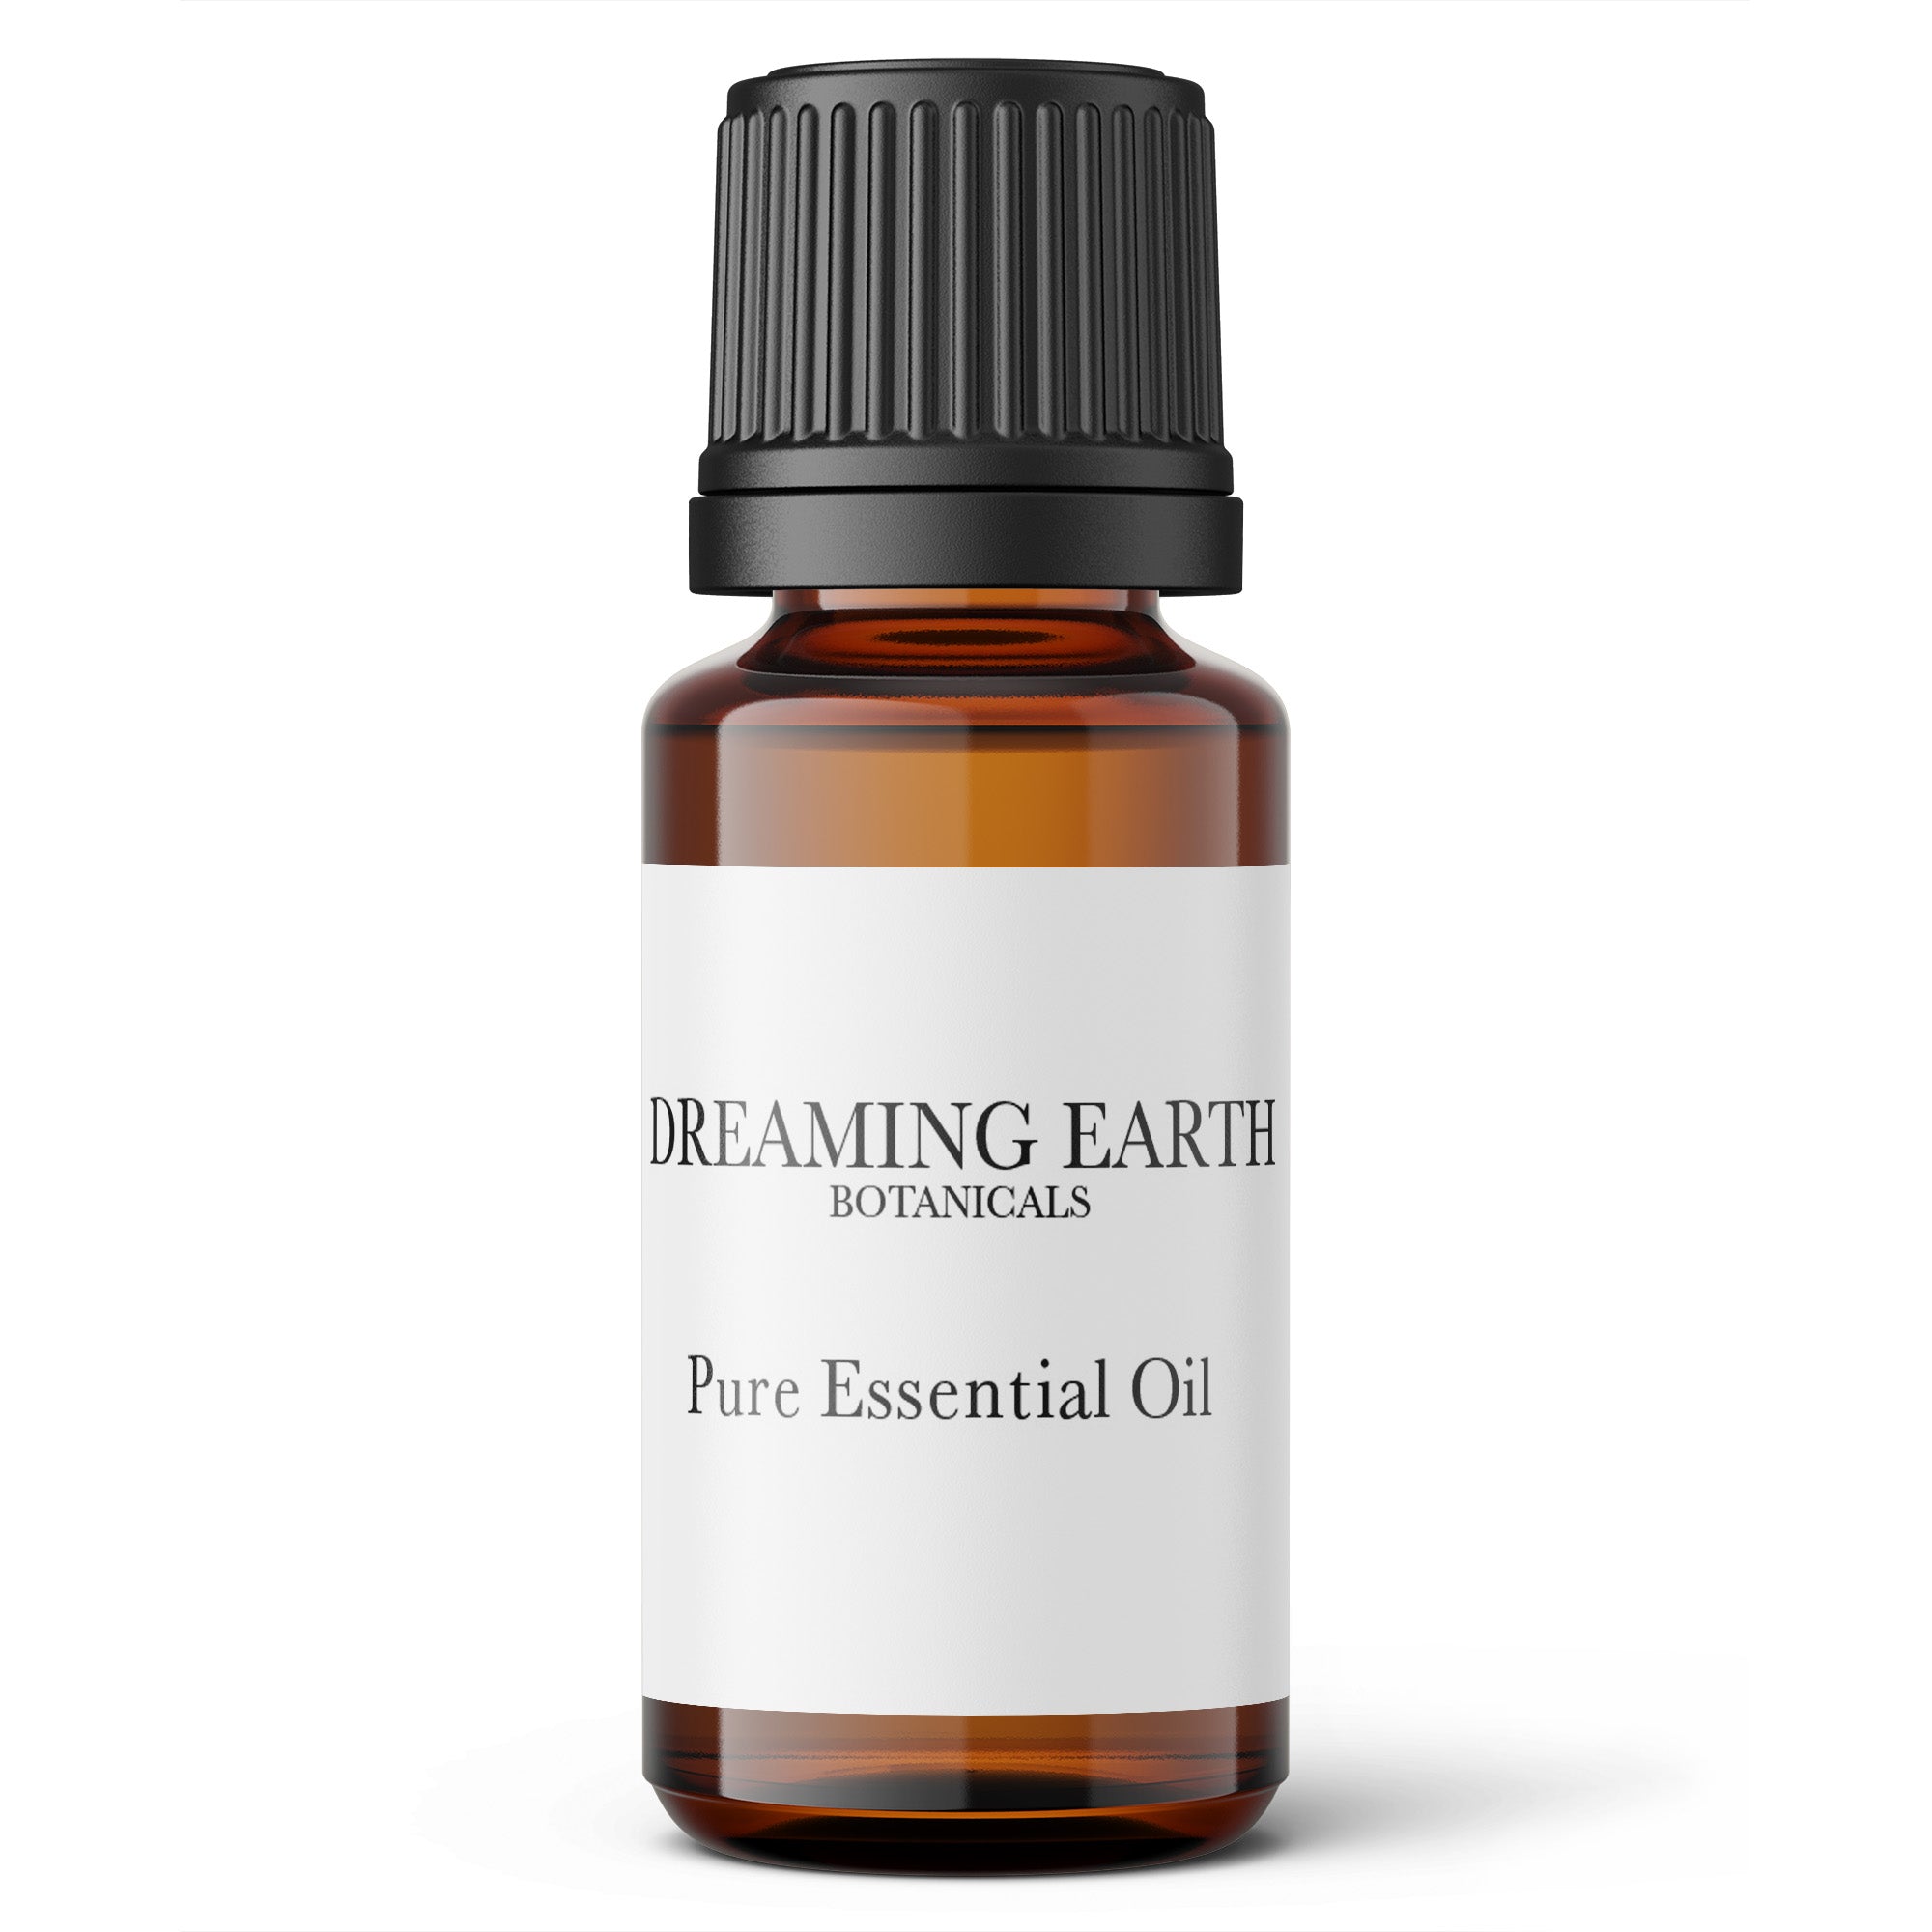 Load image into Gallery viewer, Palmarosa Essential Oil - Dreaming Earth Inc
